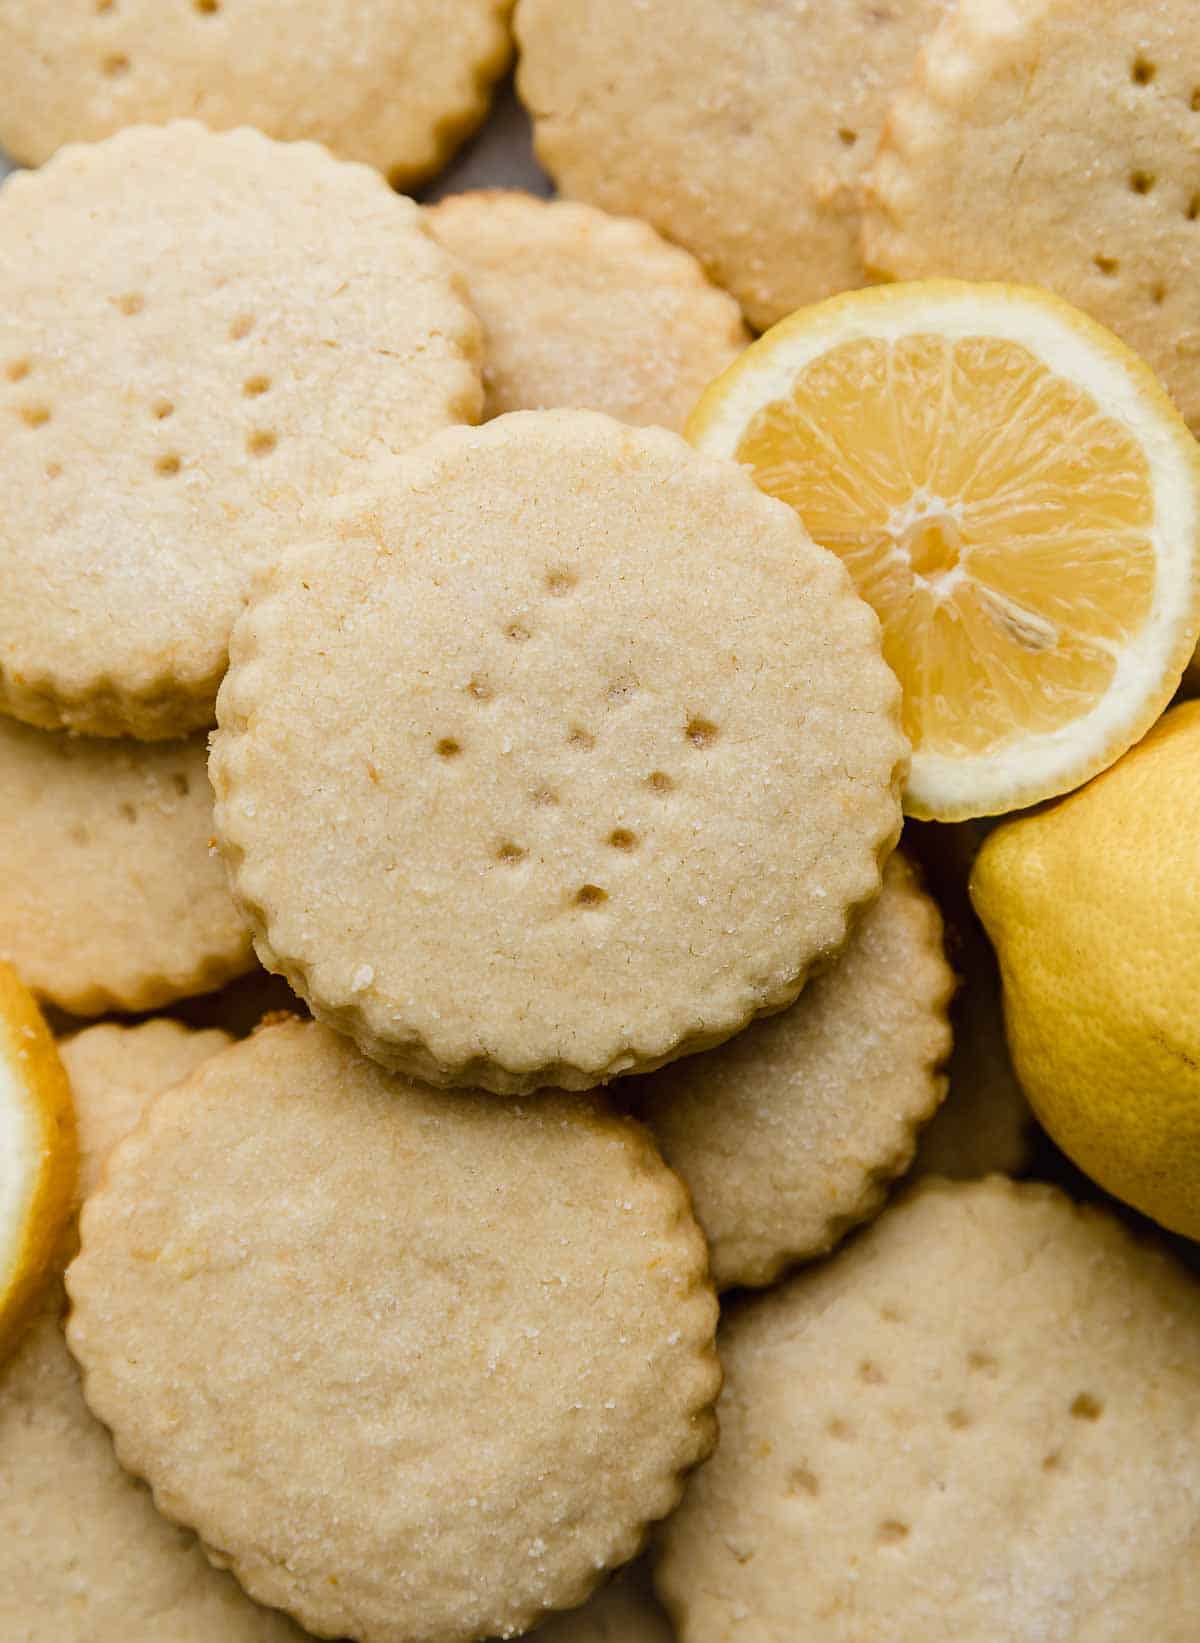 A close up photo of Lemon Shortbread Cookies stacked on top of each other, with a lemon slice to the right of the cookies.